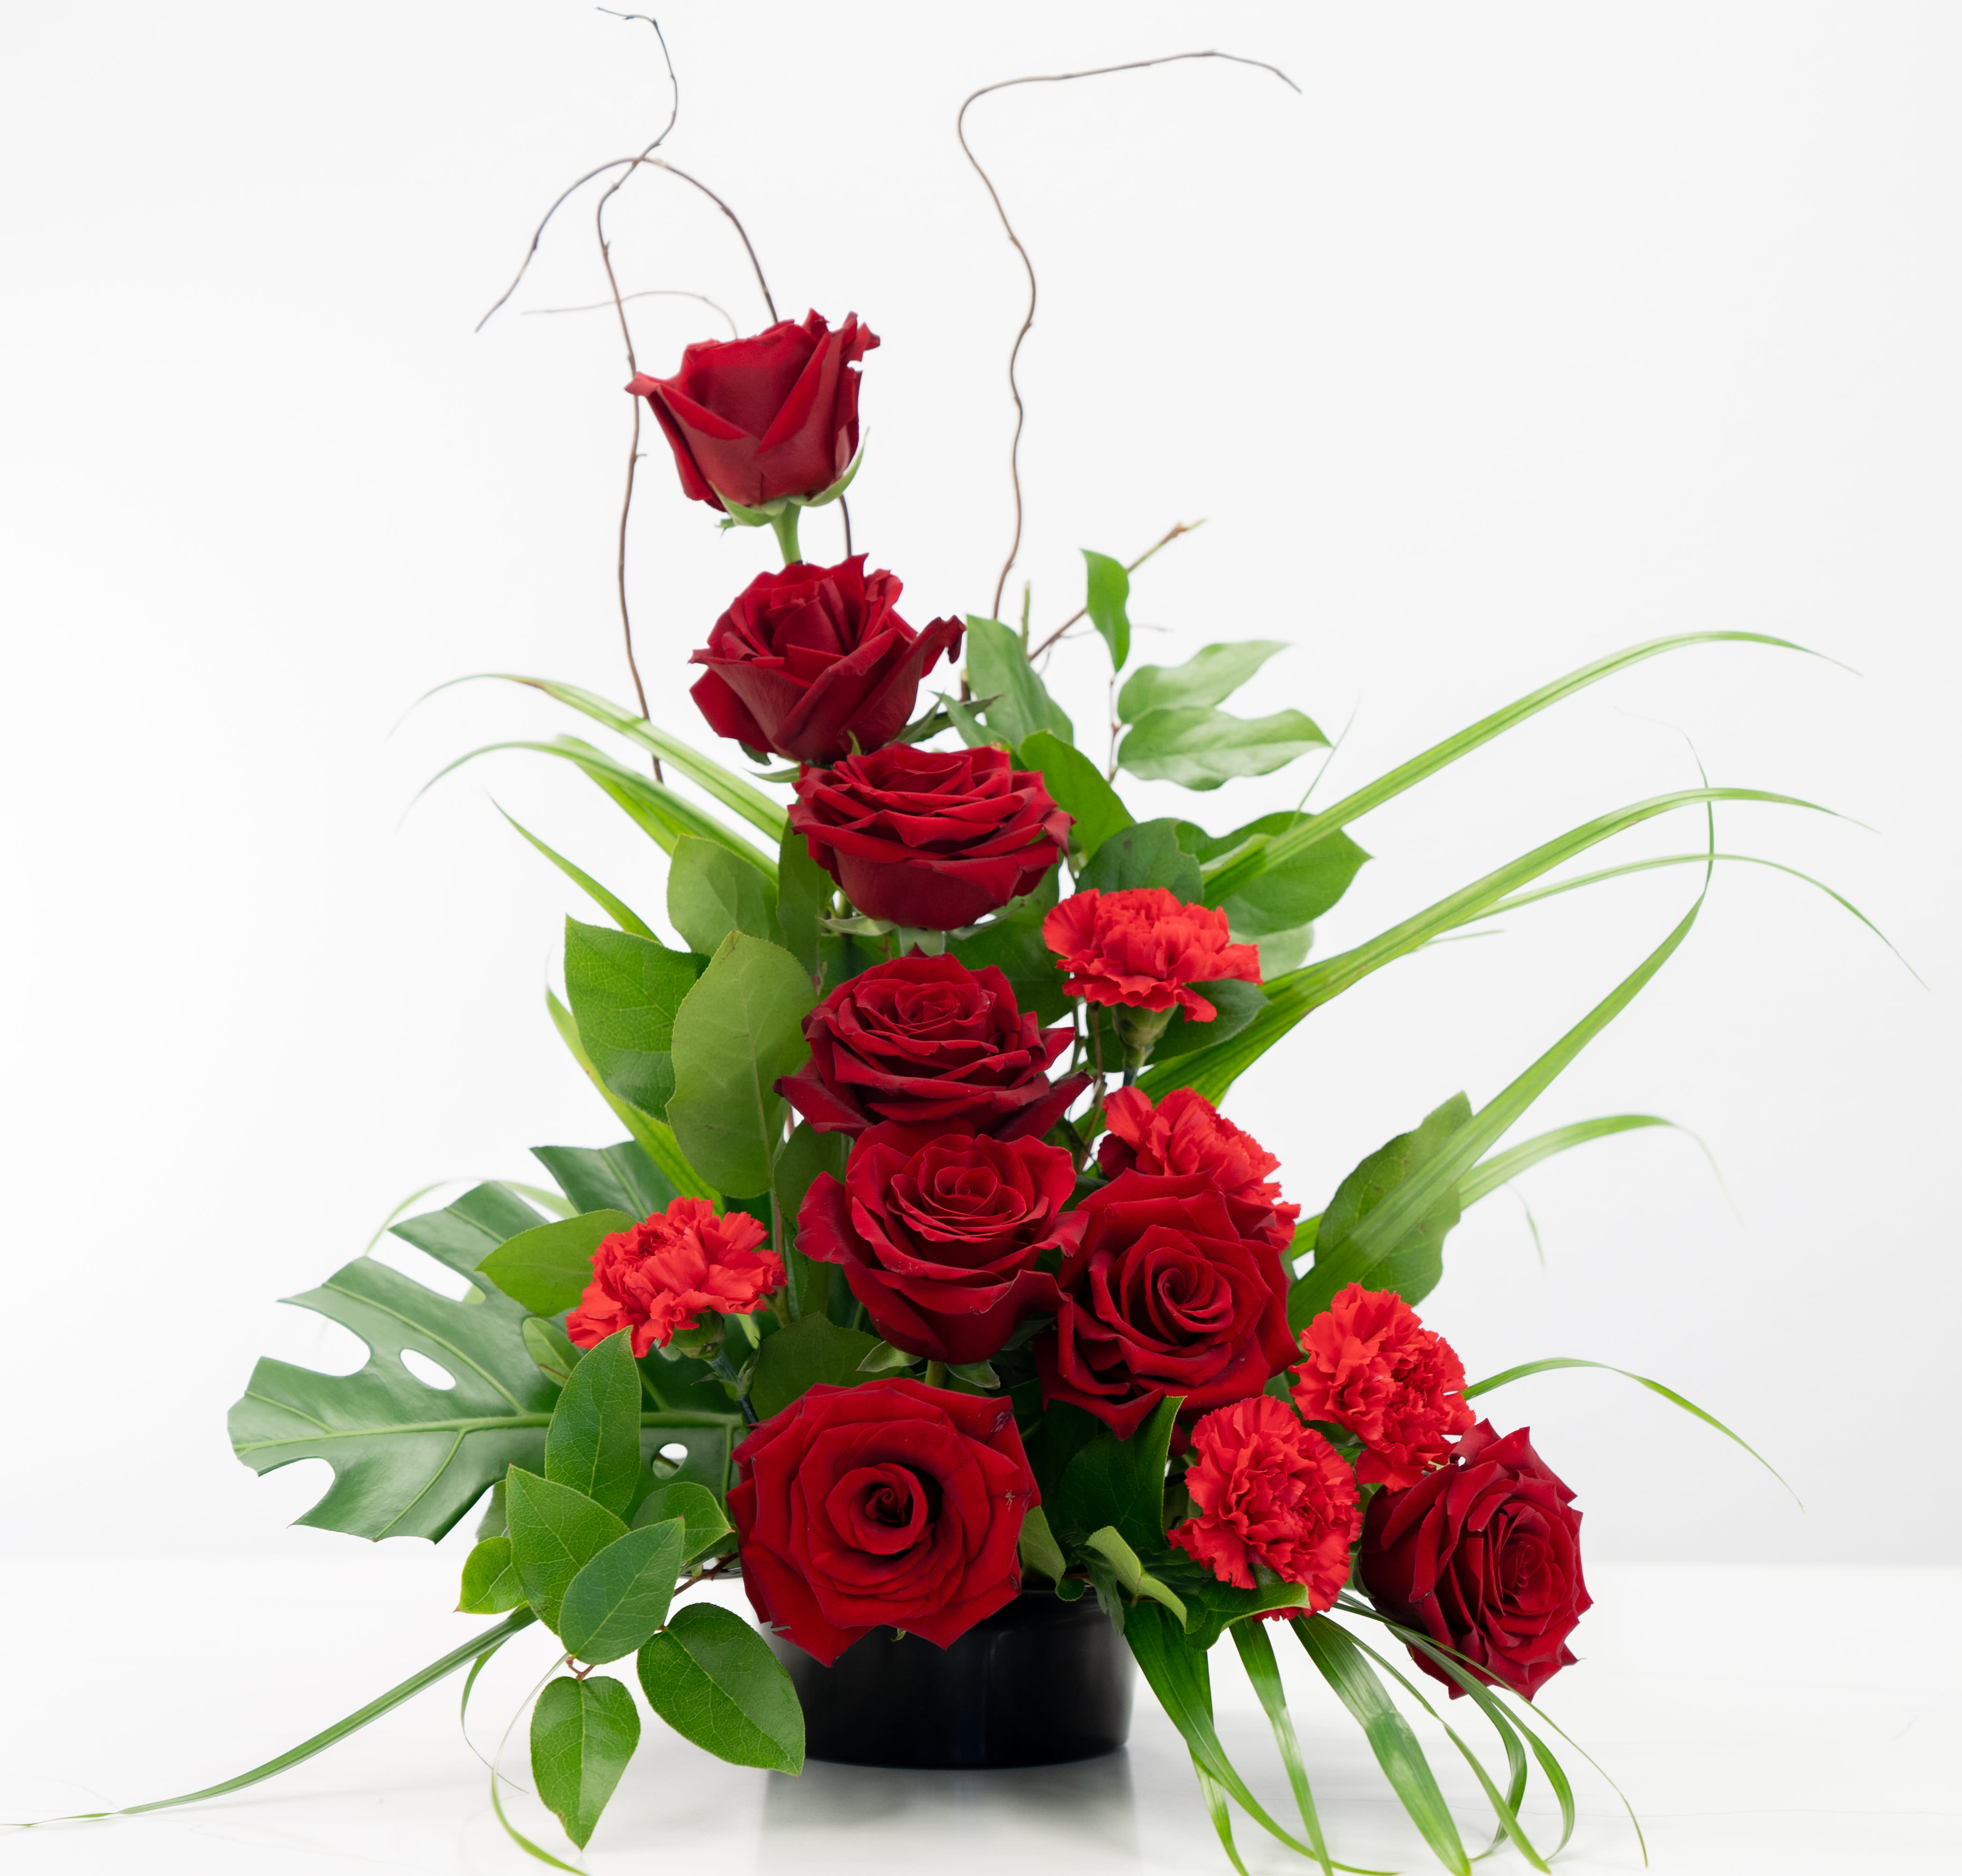 Dripping Rubies - Nothing says elegance and love like cascading red roses 